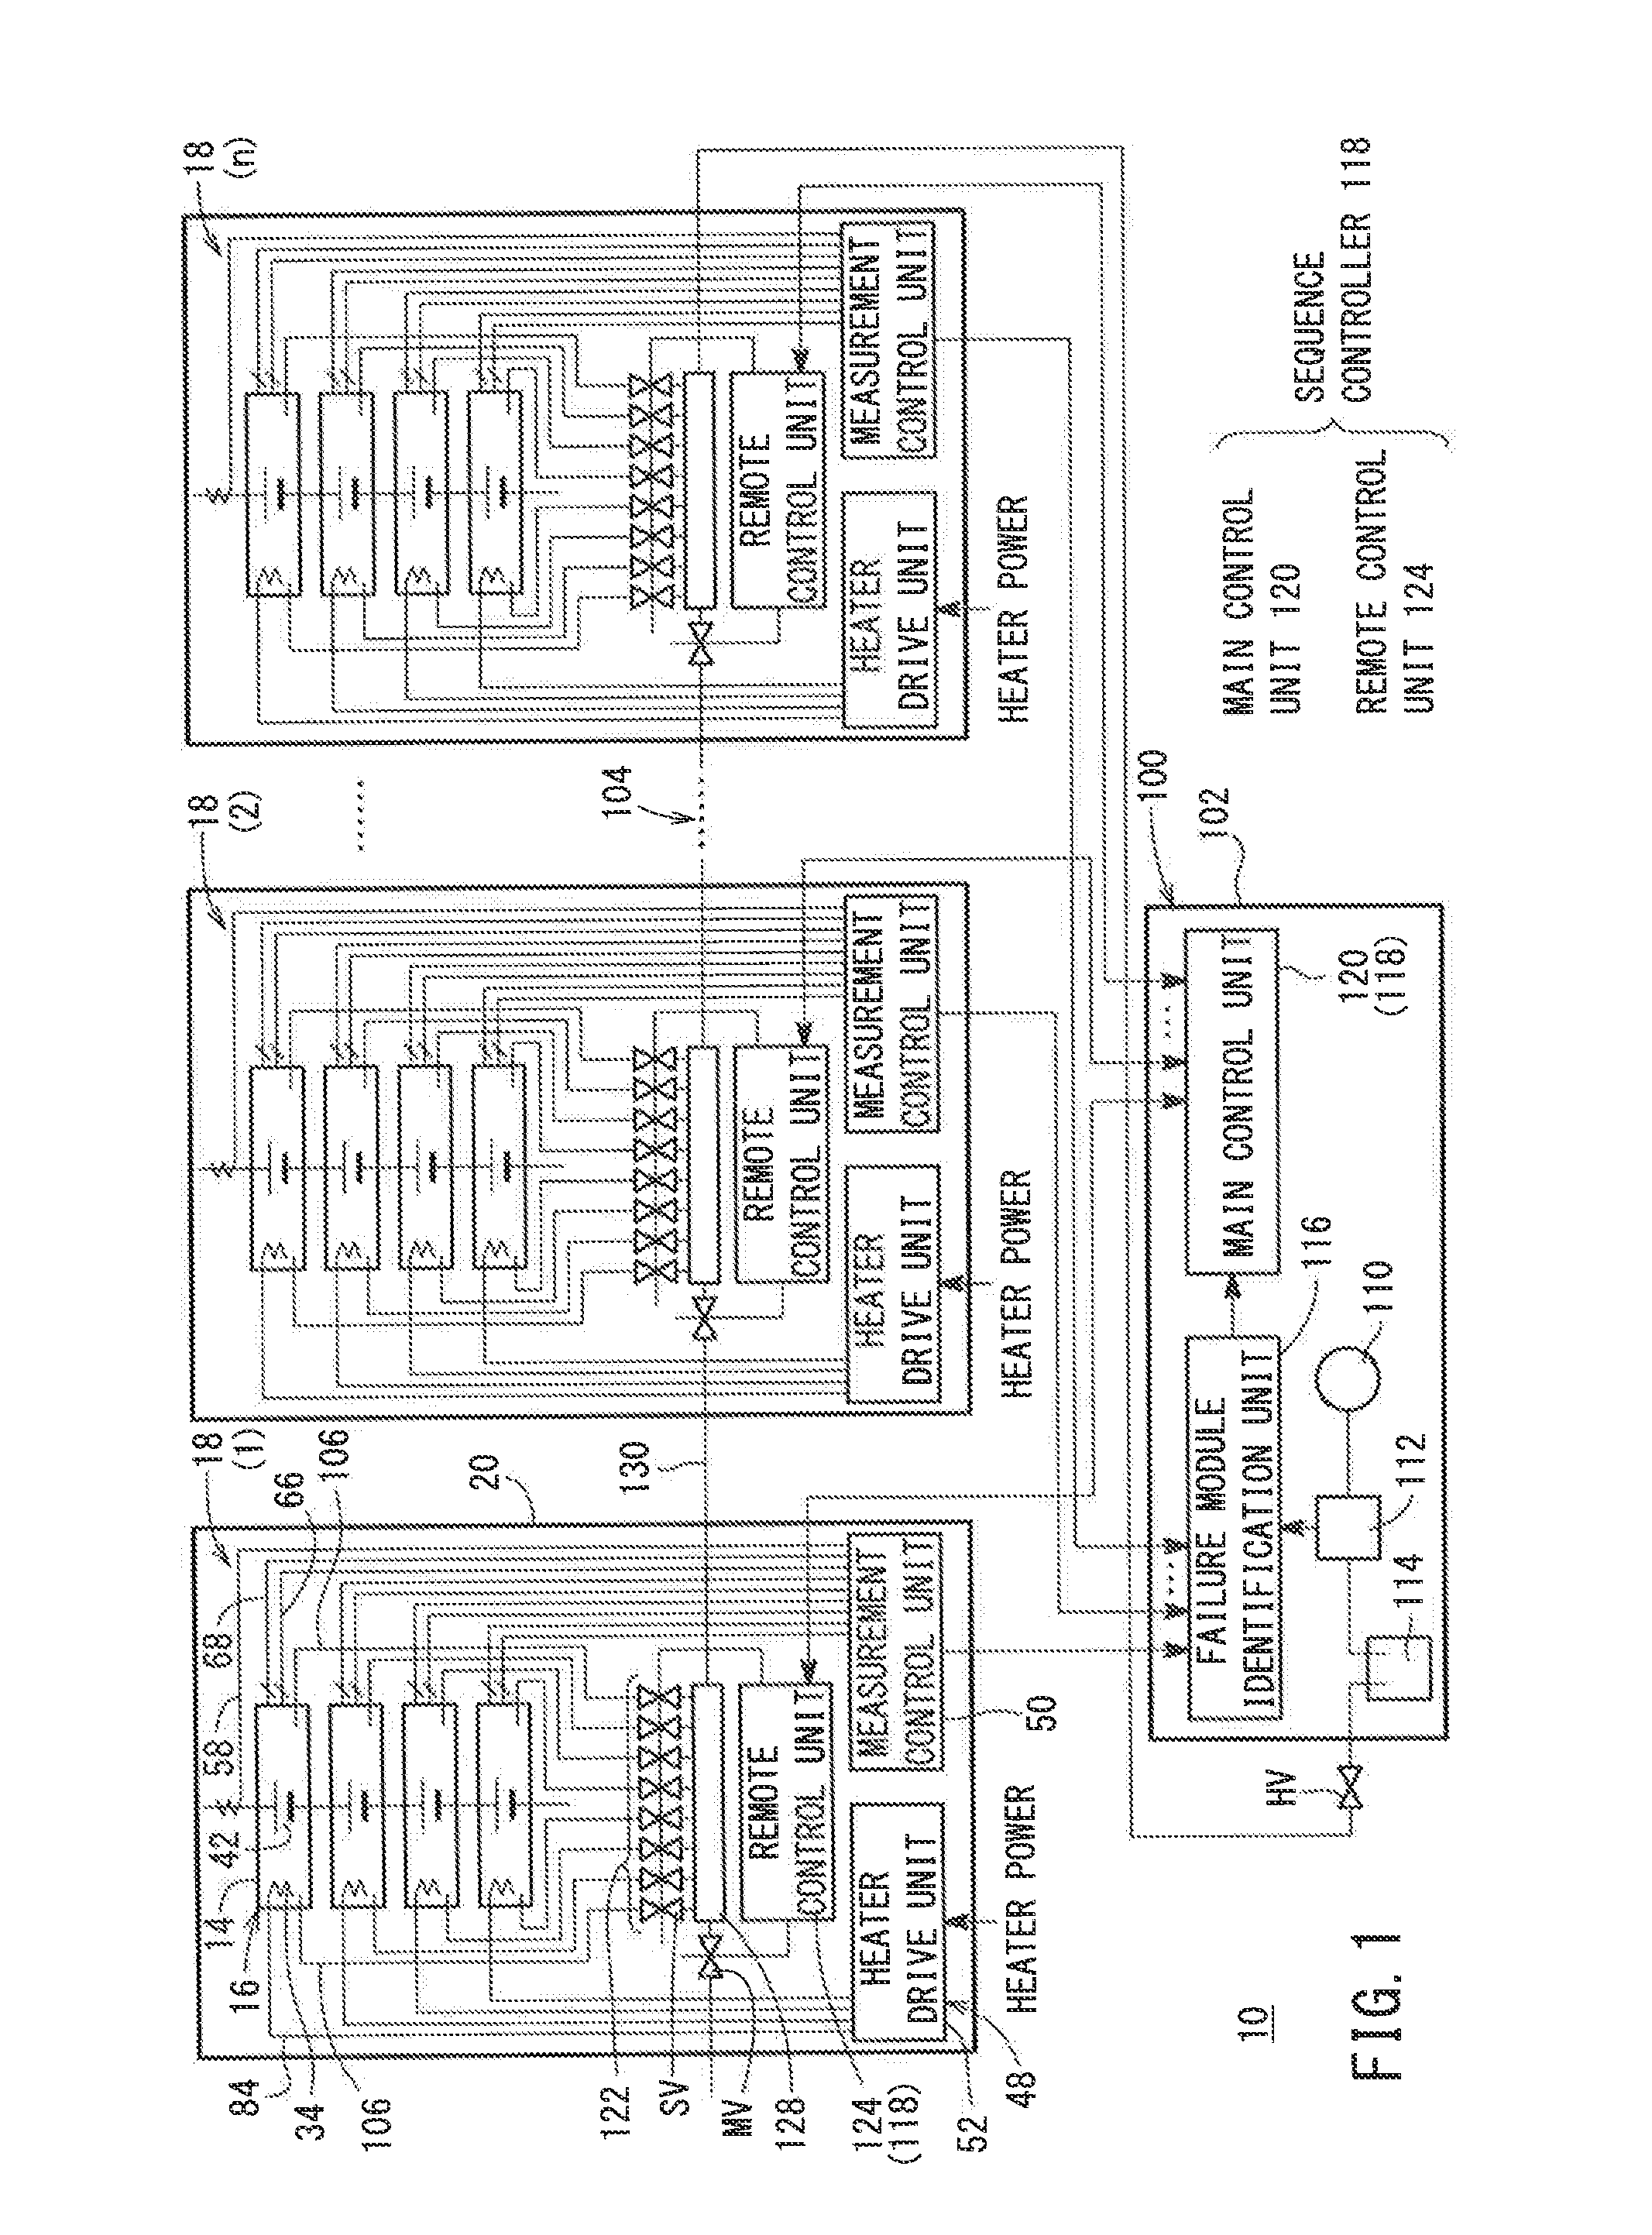 Secondary-battery system and secondary-battery-failure-detection system